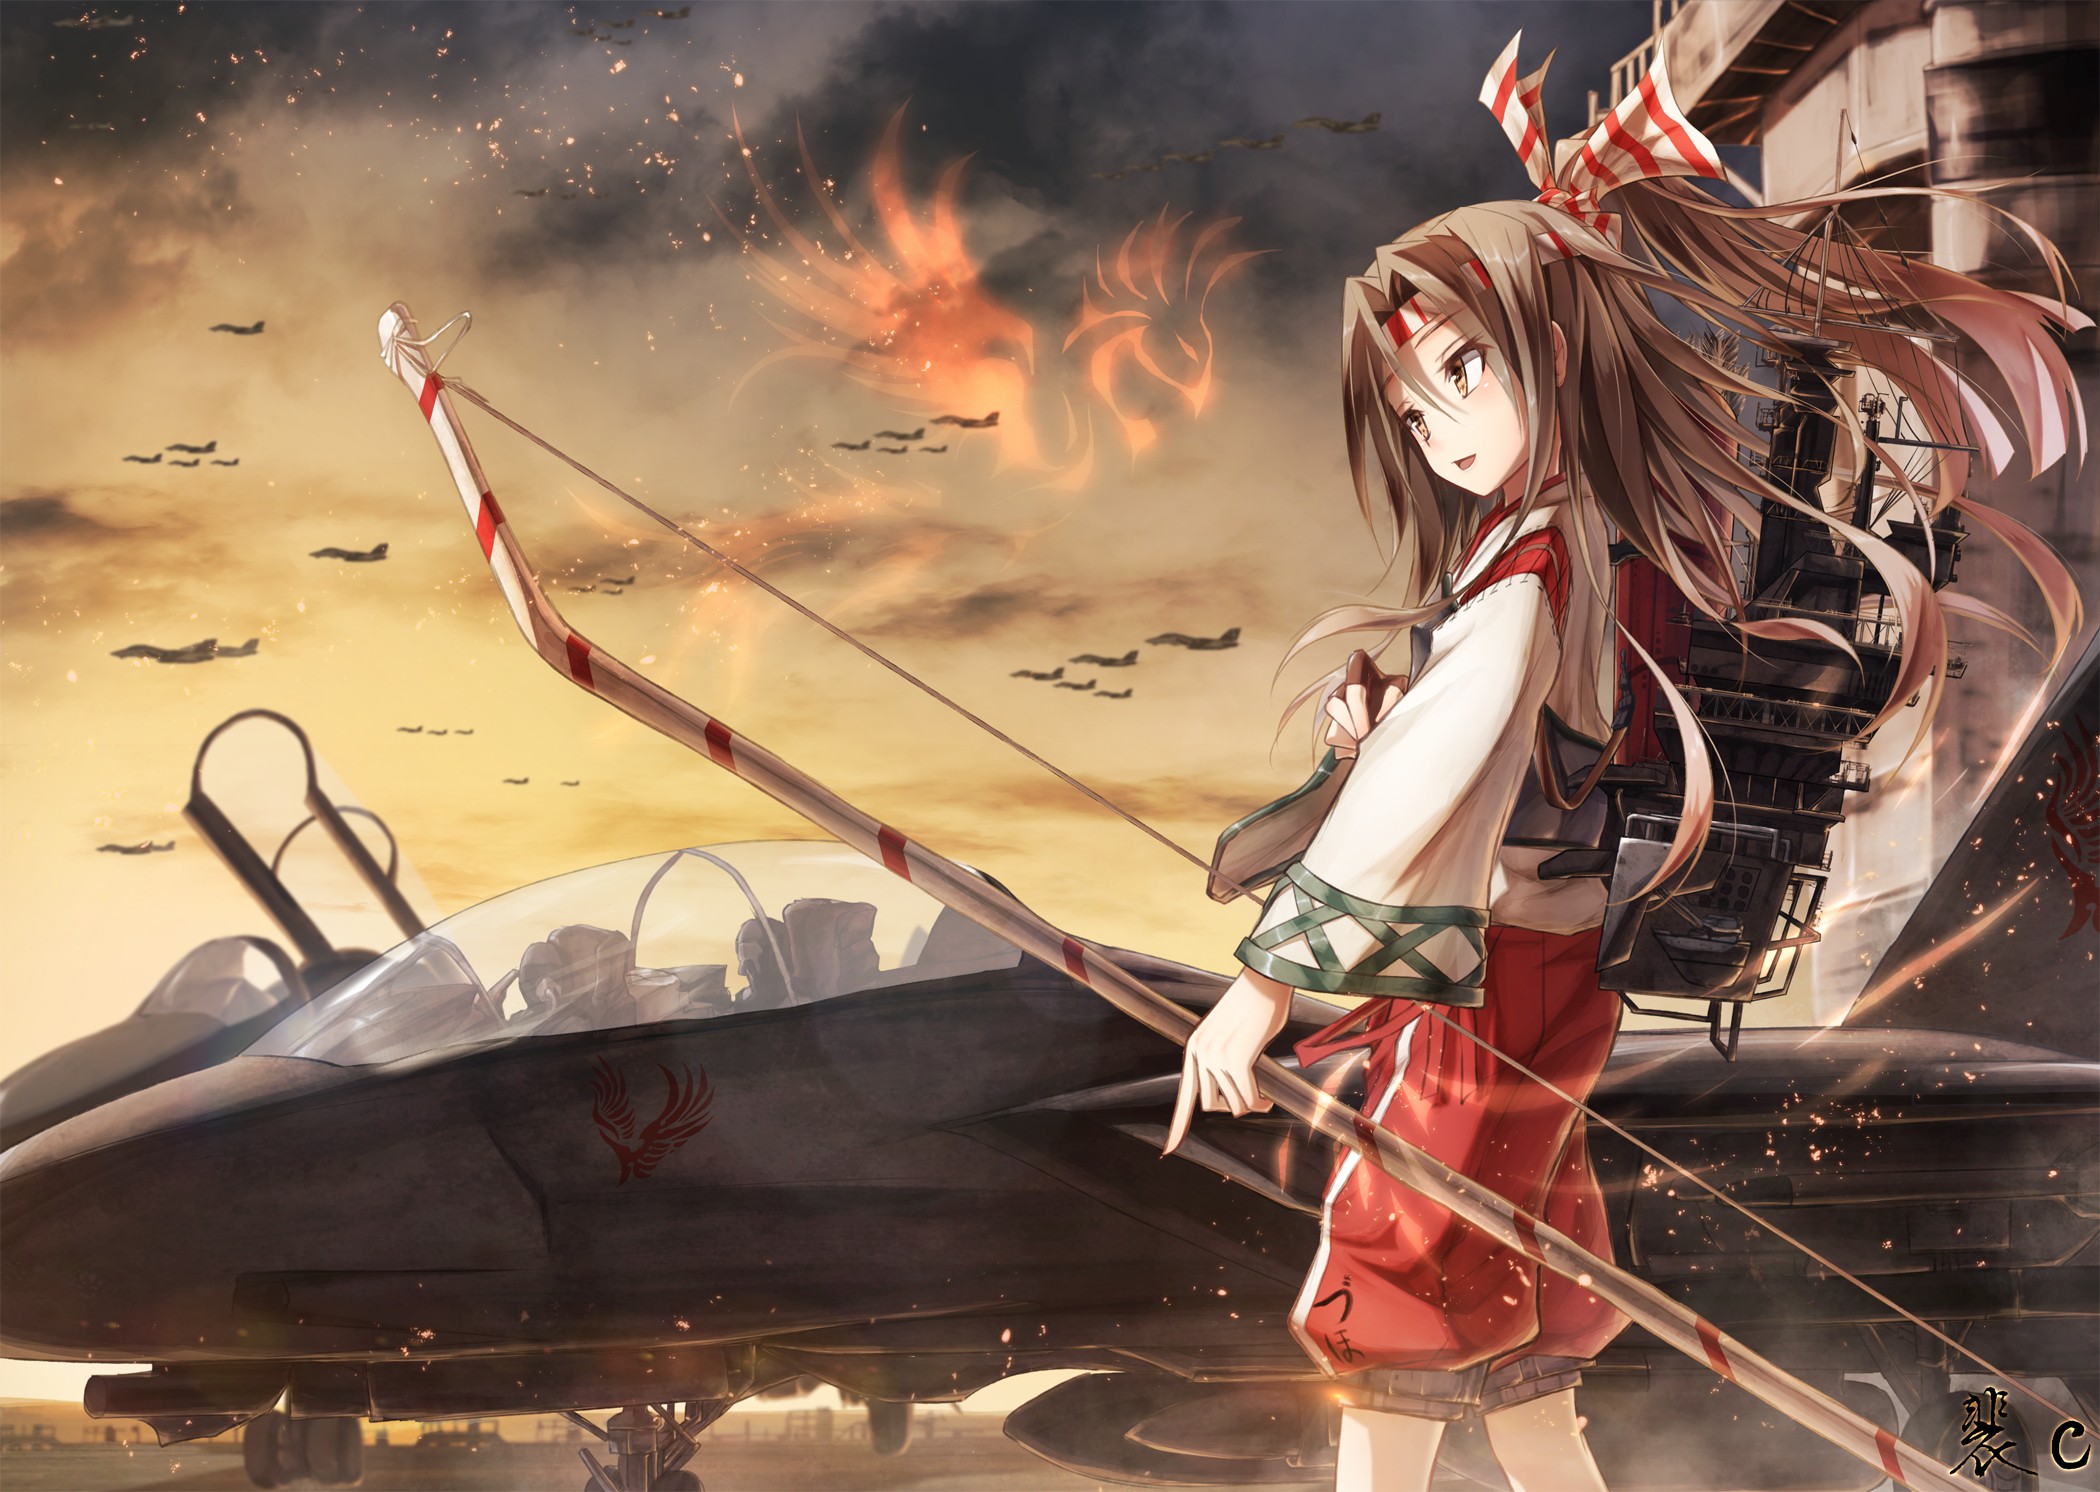 Anime 2100x1492 anime girls anime Kantai Collection Zuihou (KanColle) bow military aircraft aircraft brunette weapon vehicle military vehicle long hair